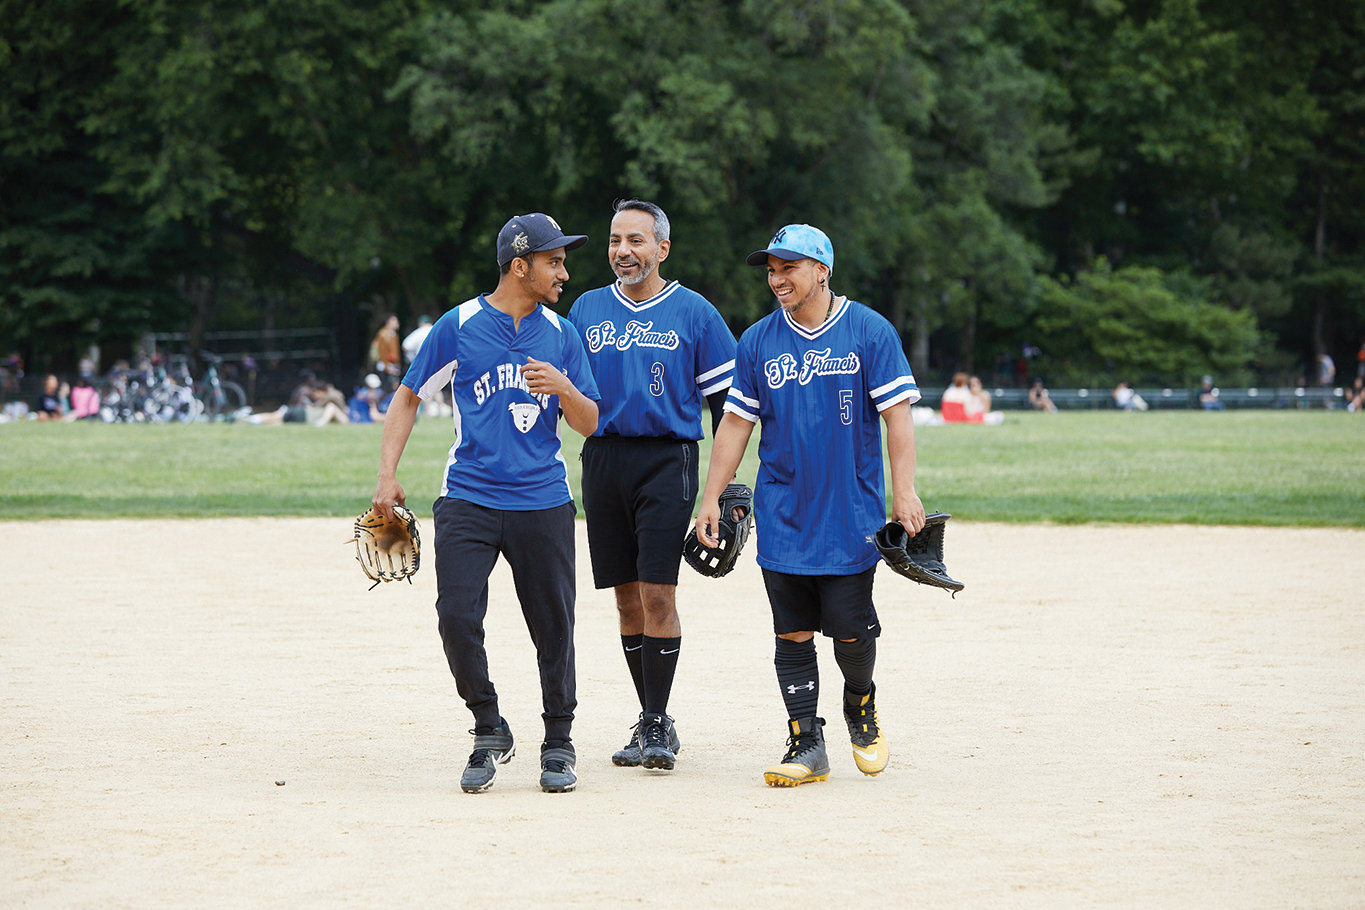 St. Francis players Johnathan Acosta, and brothers J.P. and Ken Garces, left to right, meet on the softball diamond during their team’s 5-2 win over Holy Name of Jesus in Central Park the same day.